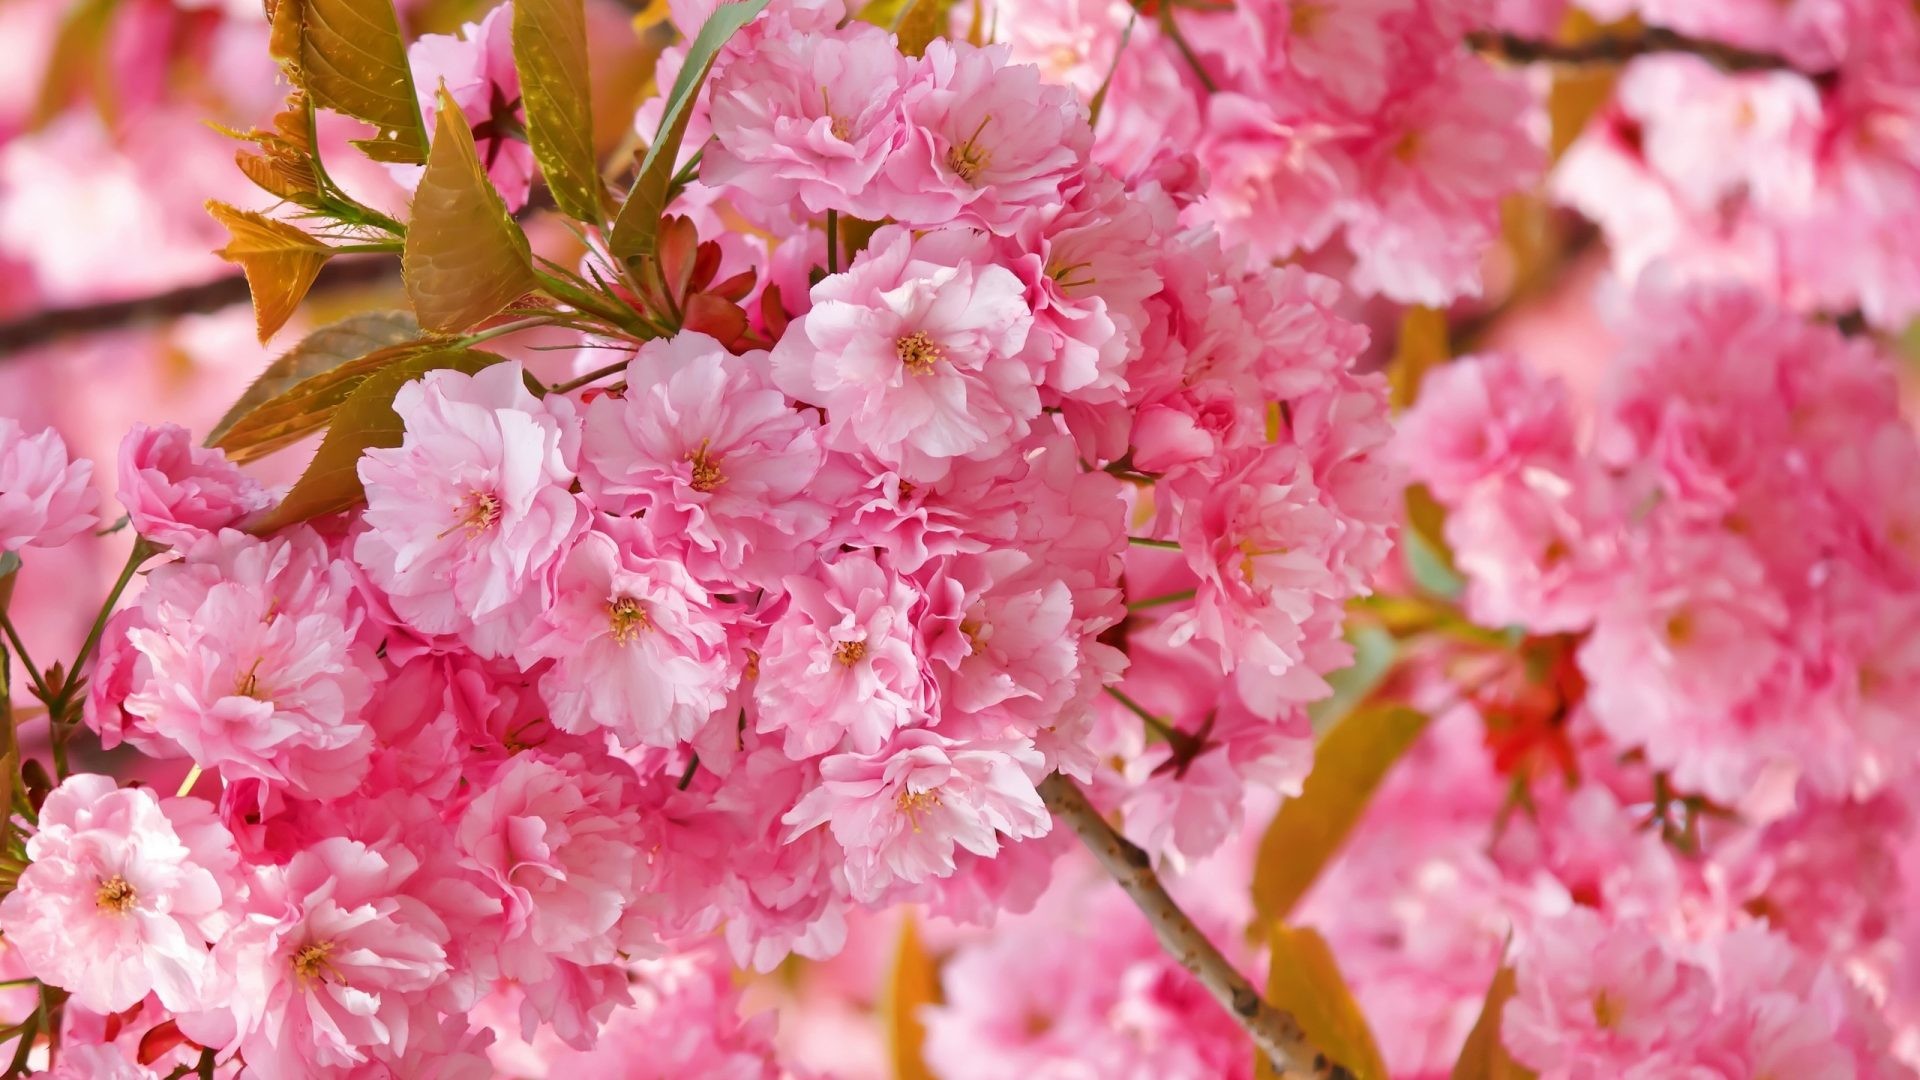 1920x1080 Blossoms Tag - Blossoms Sakura Spring Tree Cherry Pink Flowers Kwanzan Nature  Wallpaper Hd Pc for